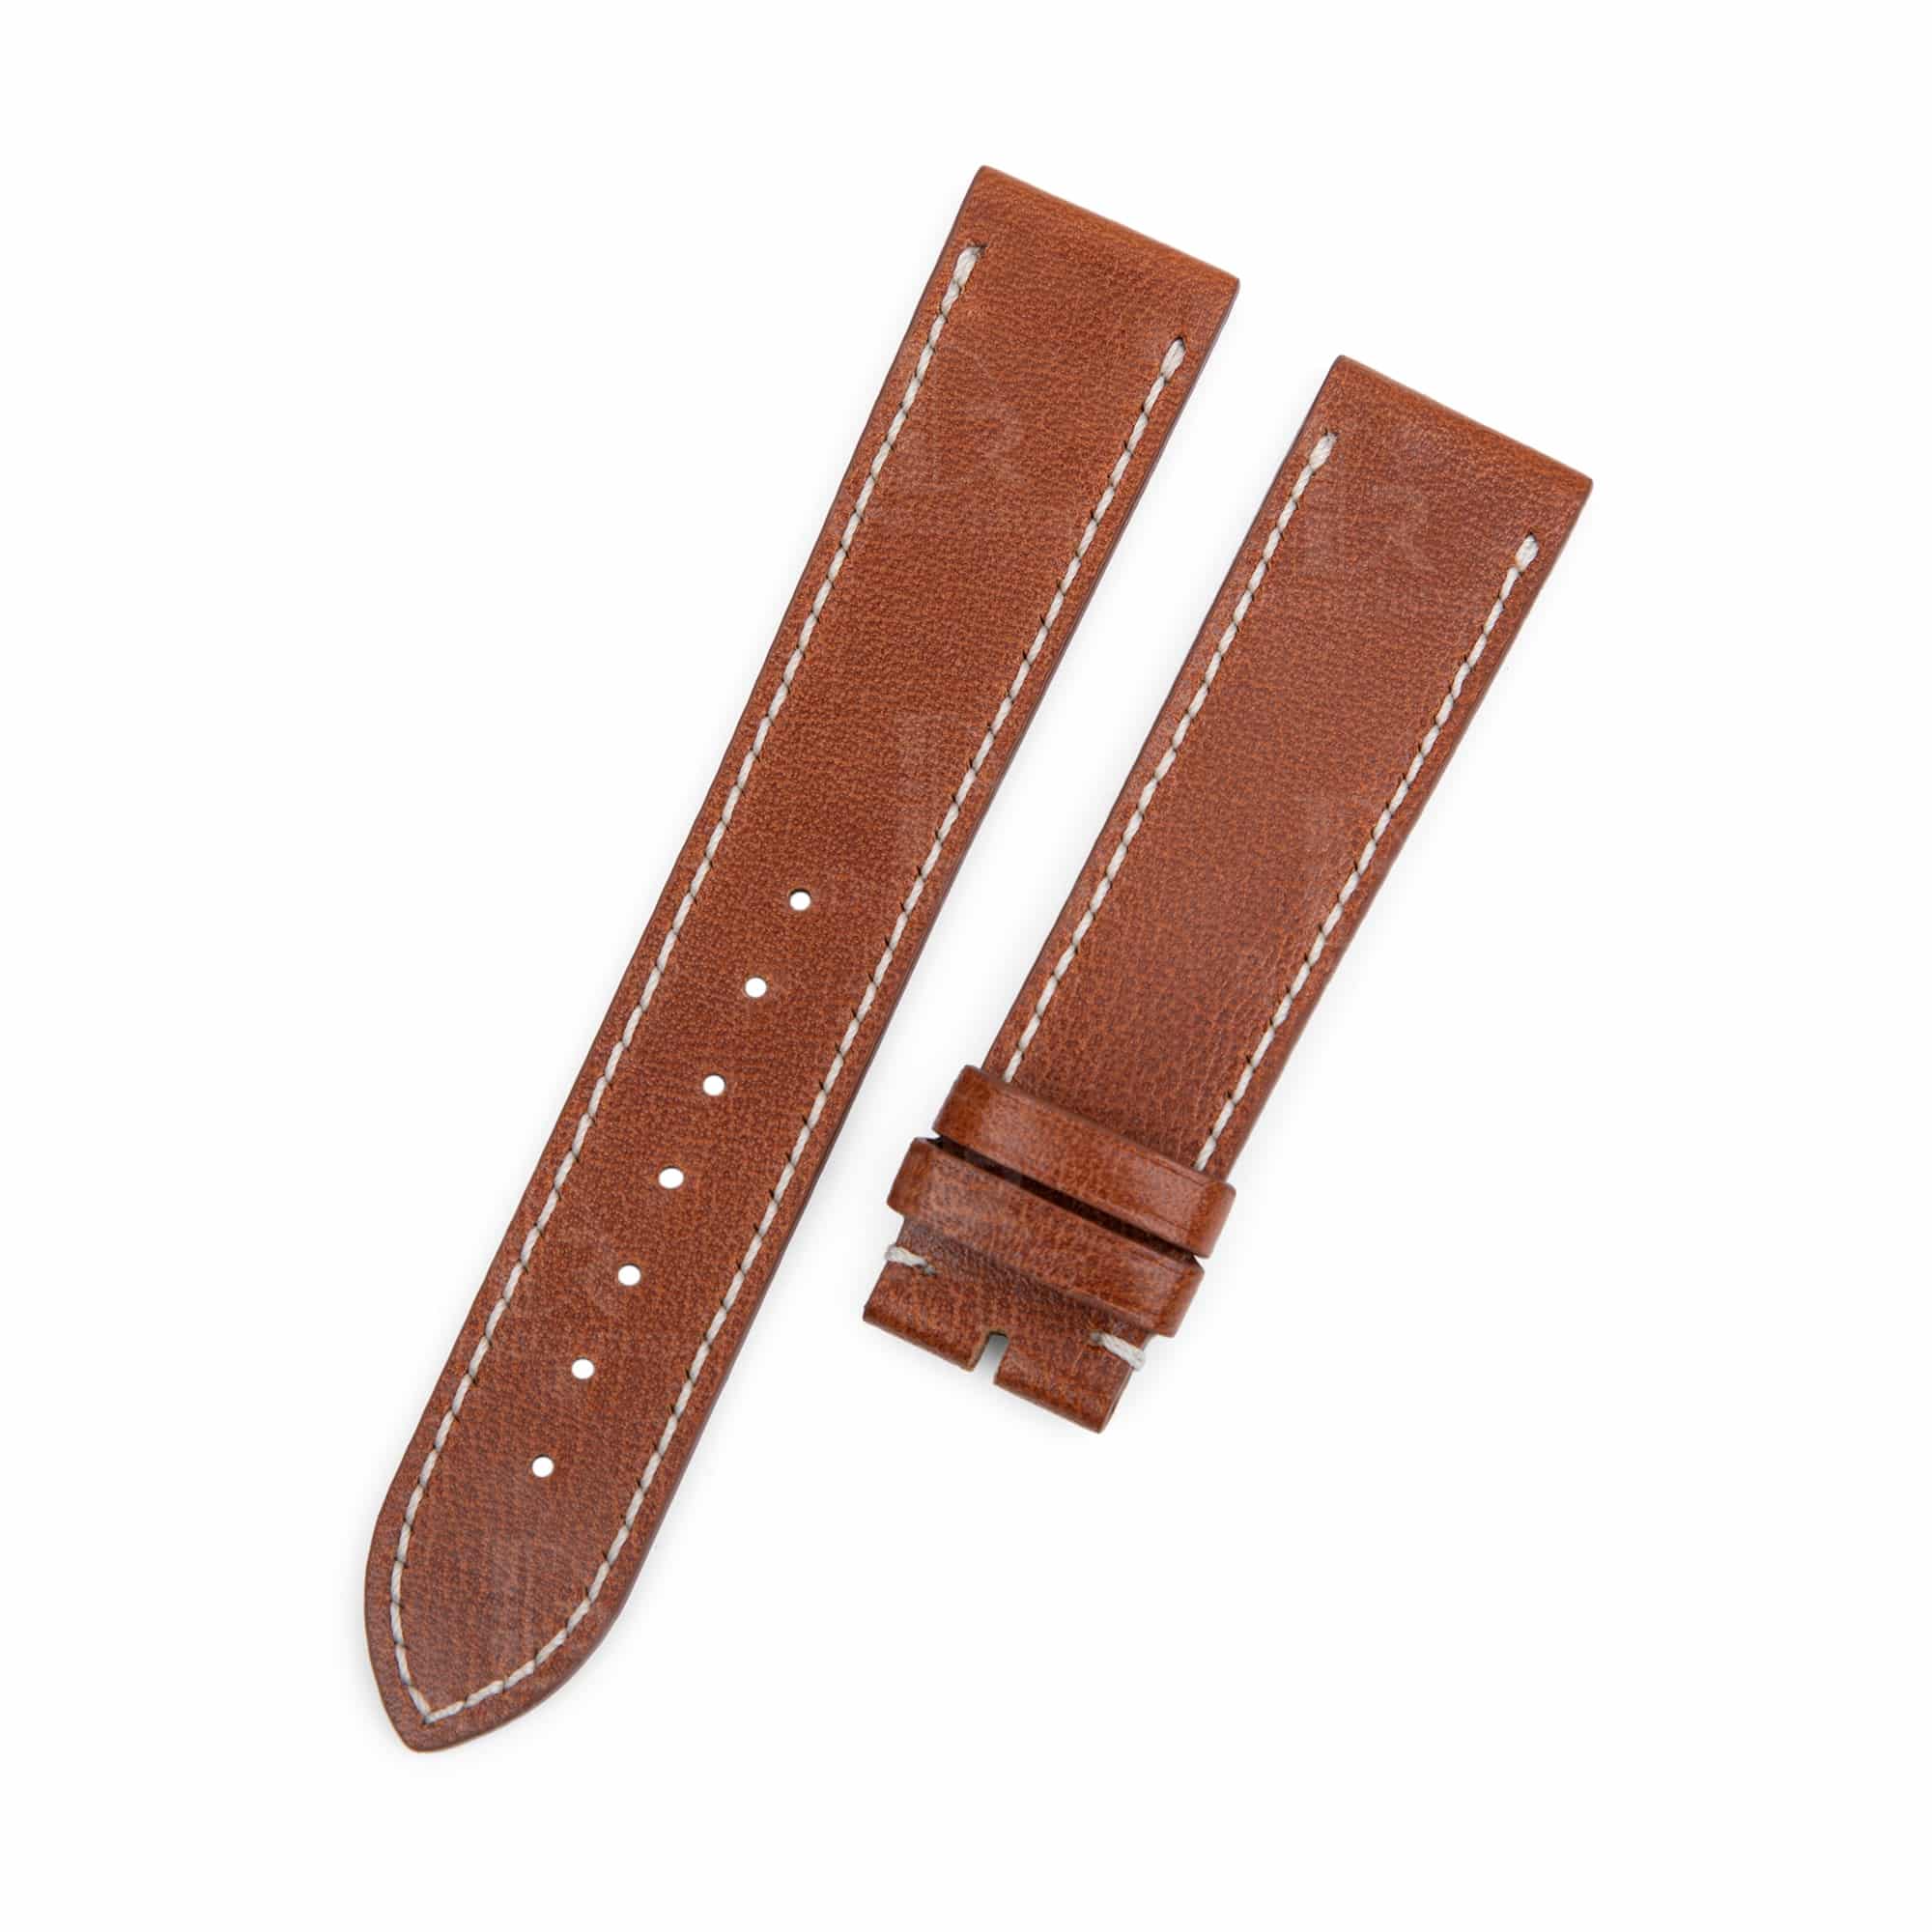 Hermes Heure H strap - Hermes Cape Cod strap for sale replacement - Custom best High-end qualtiy premium calfskin brown replacement leather Rolex Hermes Strap and watchband with 20mm lug size handmade for Rolex, Tudor, Patek Philippe universale watches online at a low price